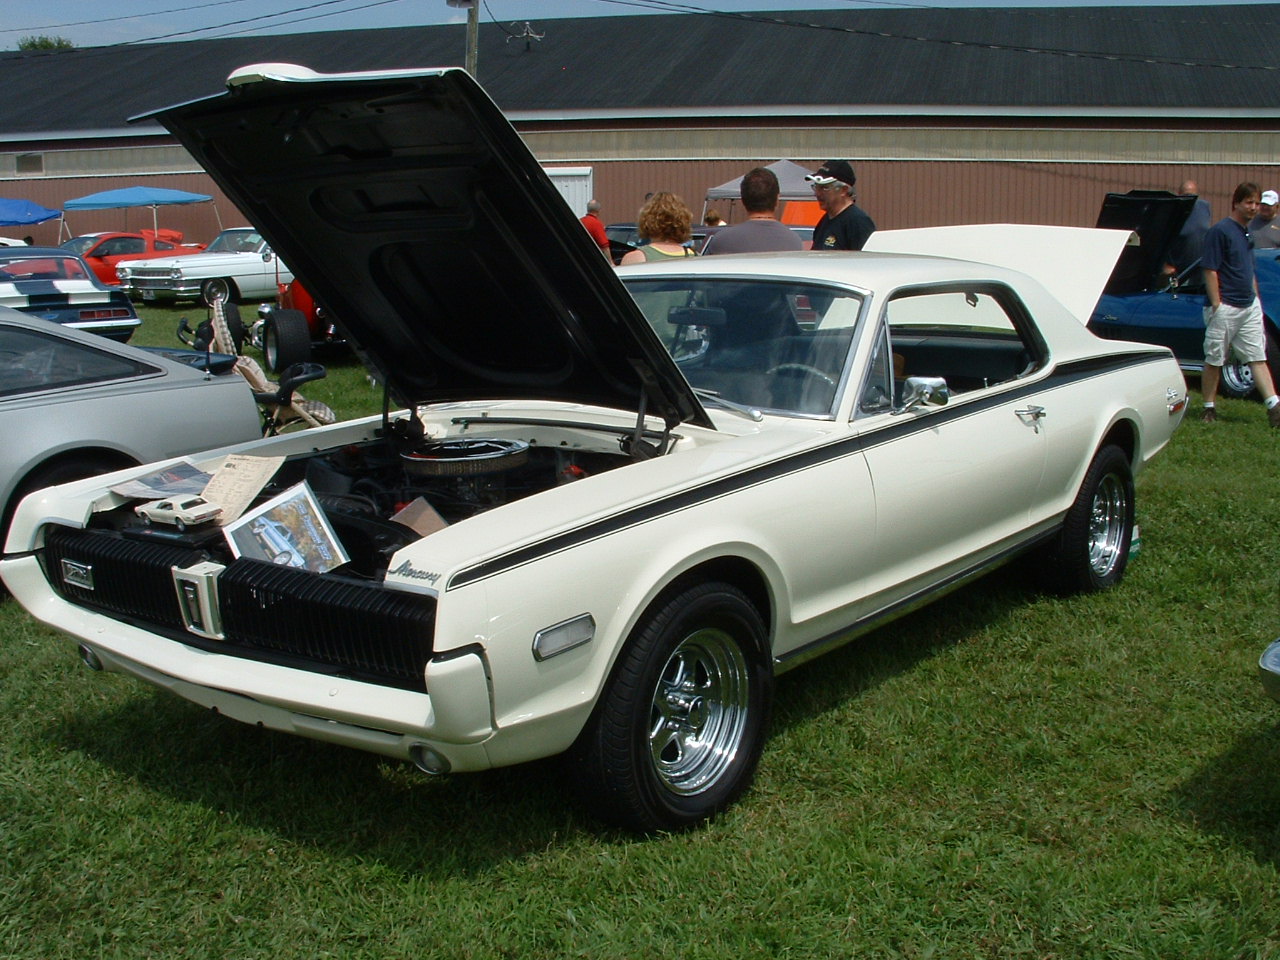 1968 Mercury Cougar brought to